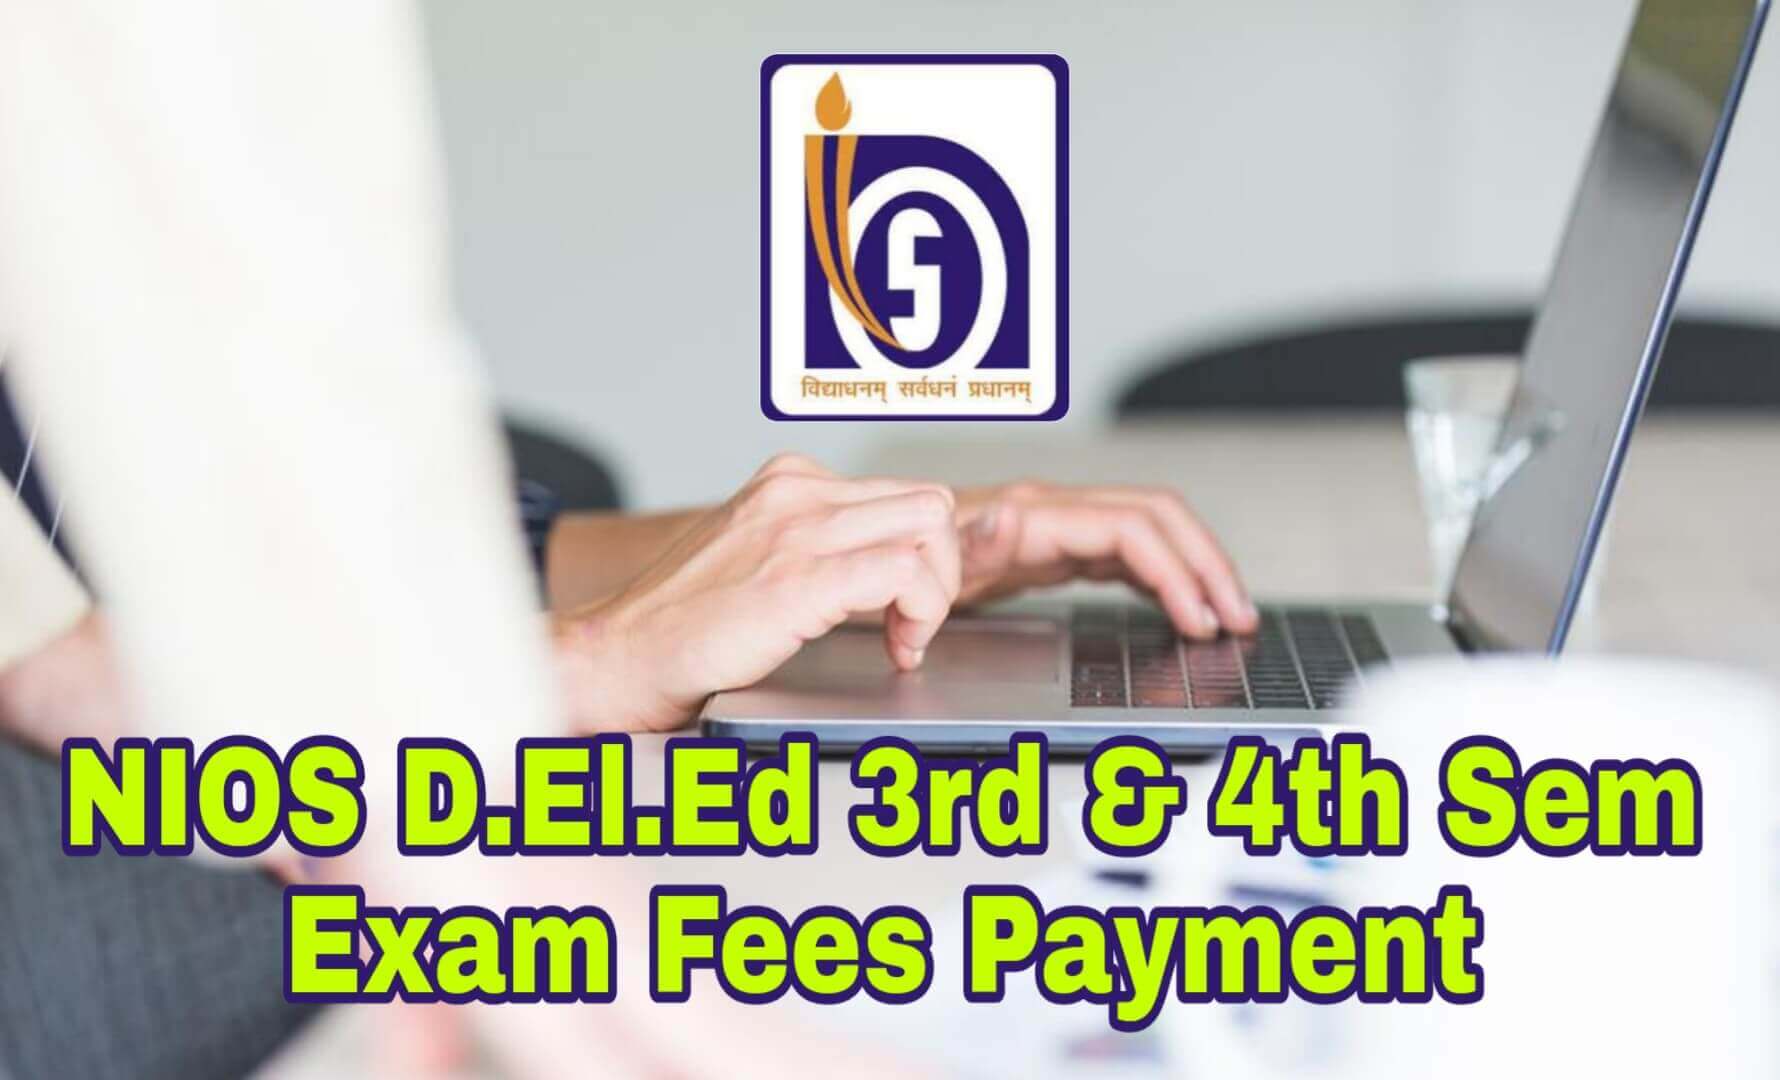 NIOS DElEd 3rd & 4th Semesters Exam Fees Payment for December 2018 Exam 1